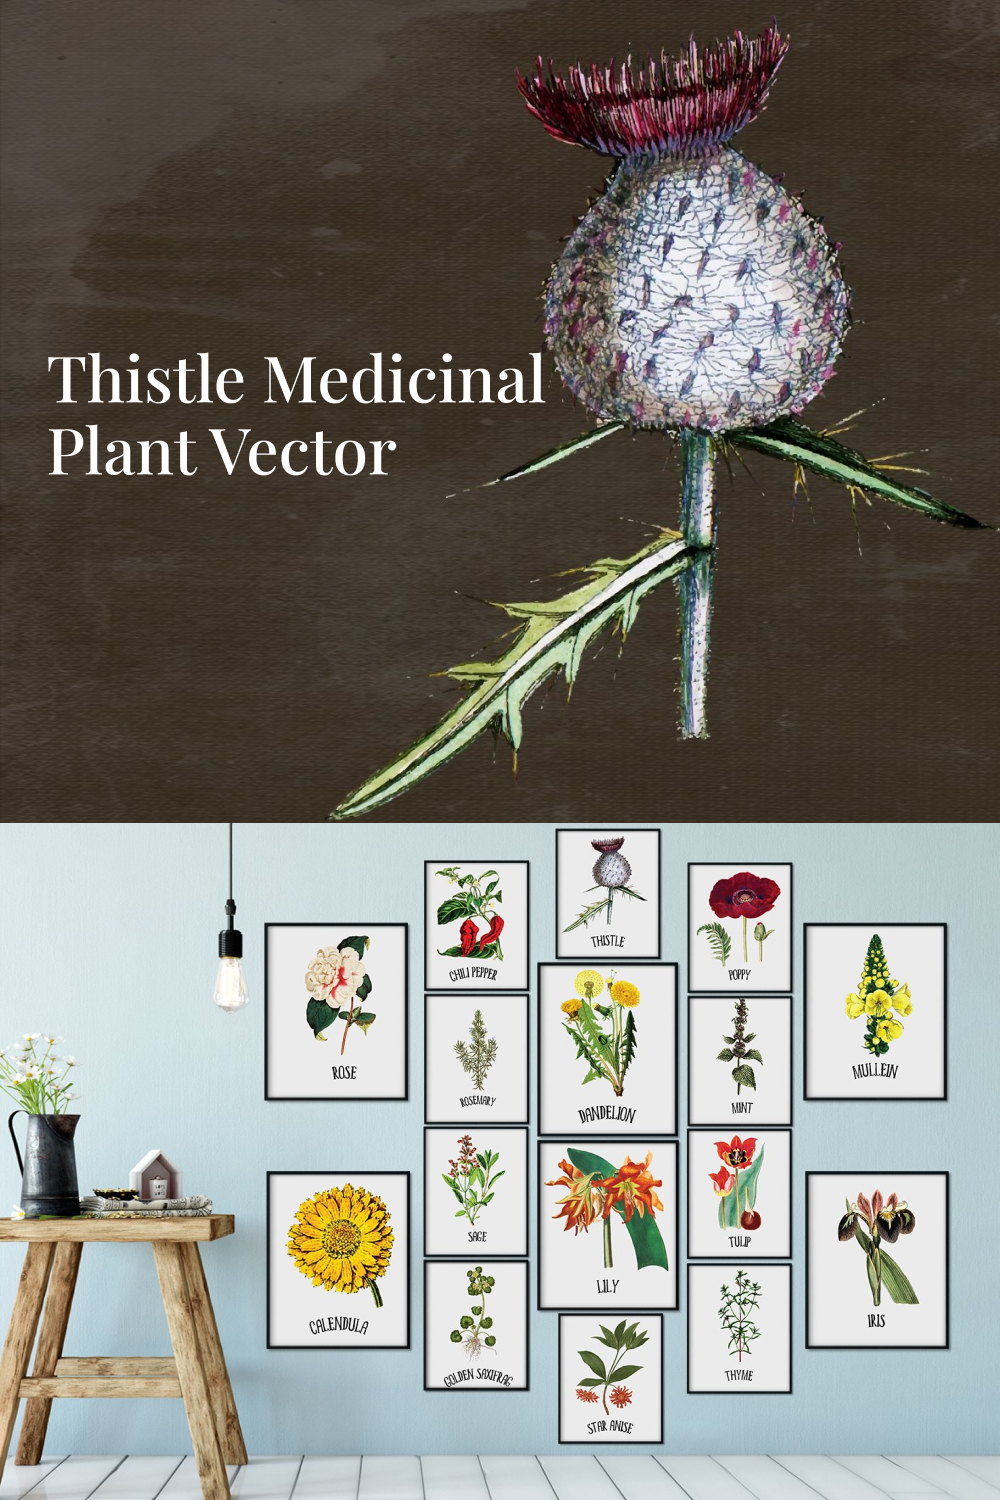 Thistle medicinal plant vector of pinterest.